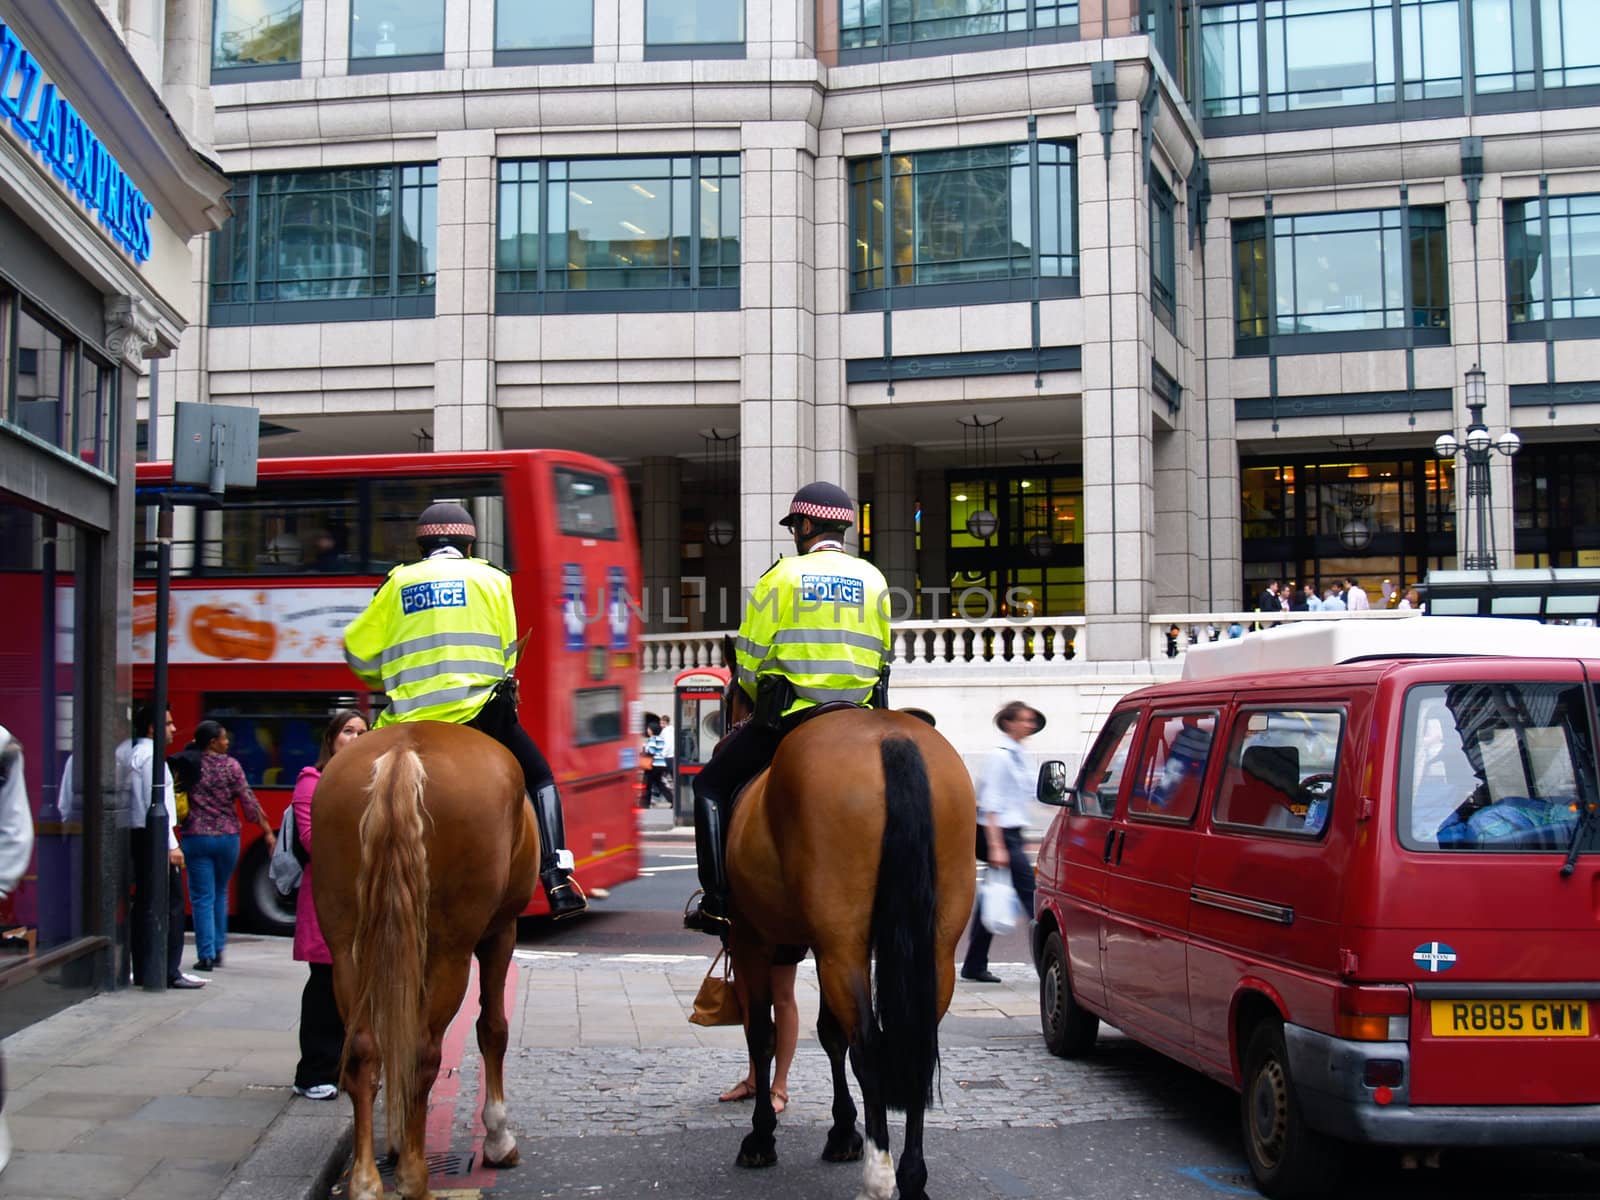 Mounted police in streets of London, England providing a law- keeping presence in 2009. The mounted unit was used in the recent London riots.